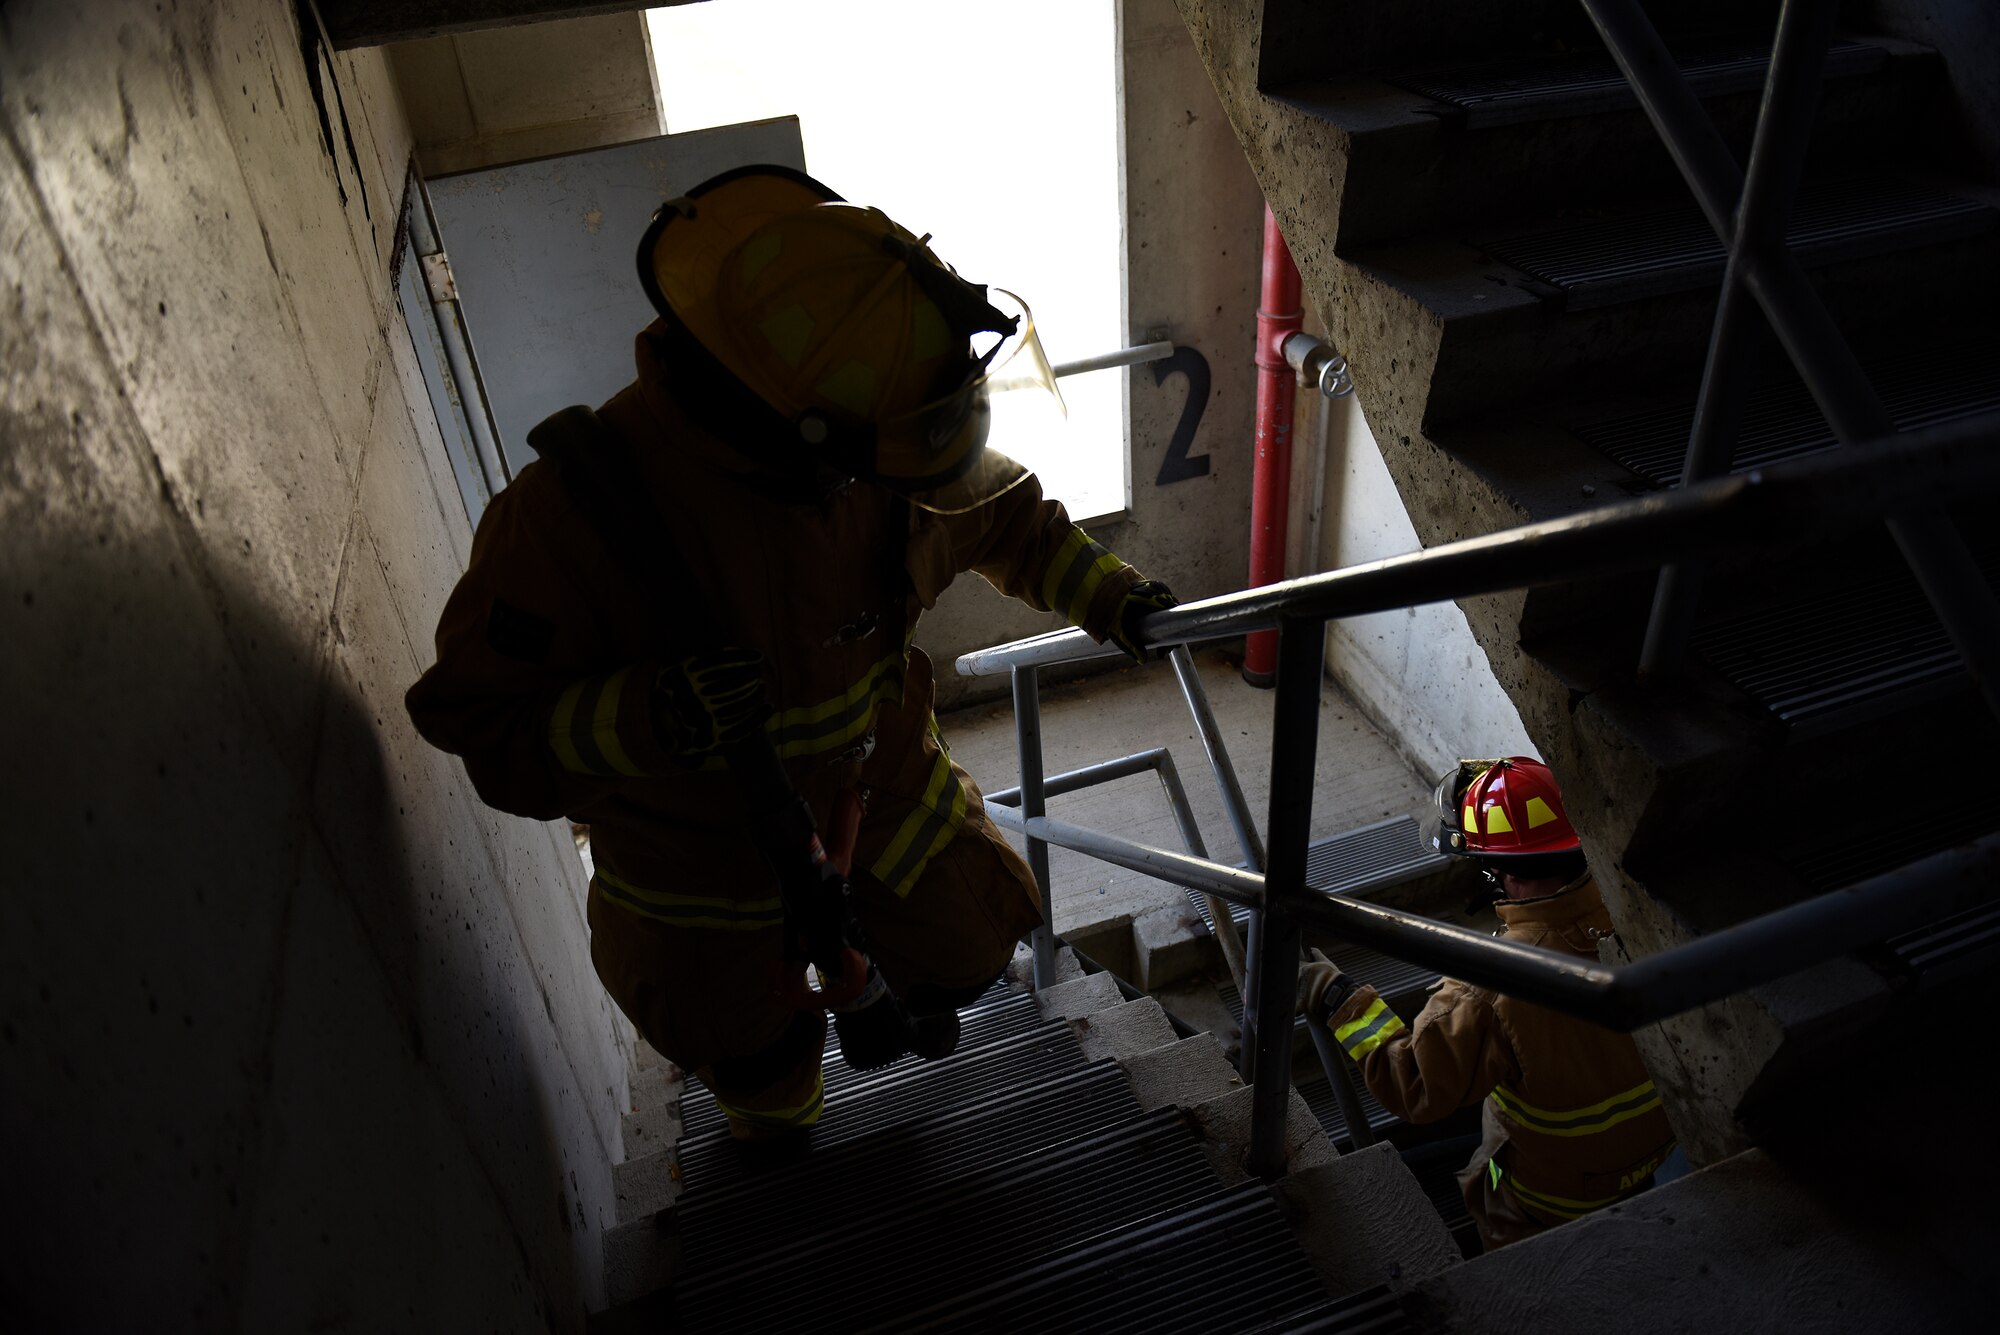 U.S. Air National Guard firefighters assigned to the 180th Fighter Wing ascend a stairwell while carrying a firehose during a Regularly Scheduled Drill training exercise Nov. 7, 2015 in Swanton, Ohio. The firefighters trained on hose advancements in a five-story building during a simulated structure fire. (U.S. Air National Guard photo by Staff Sgt. Shane Hughes/Released)